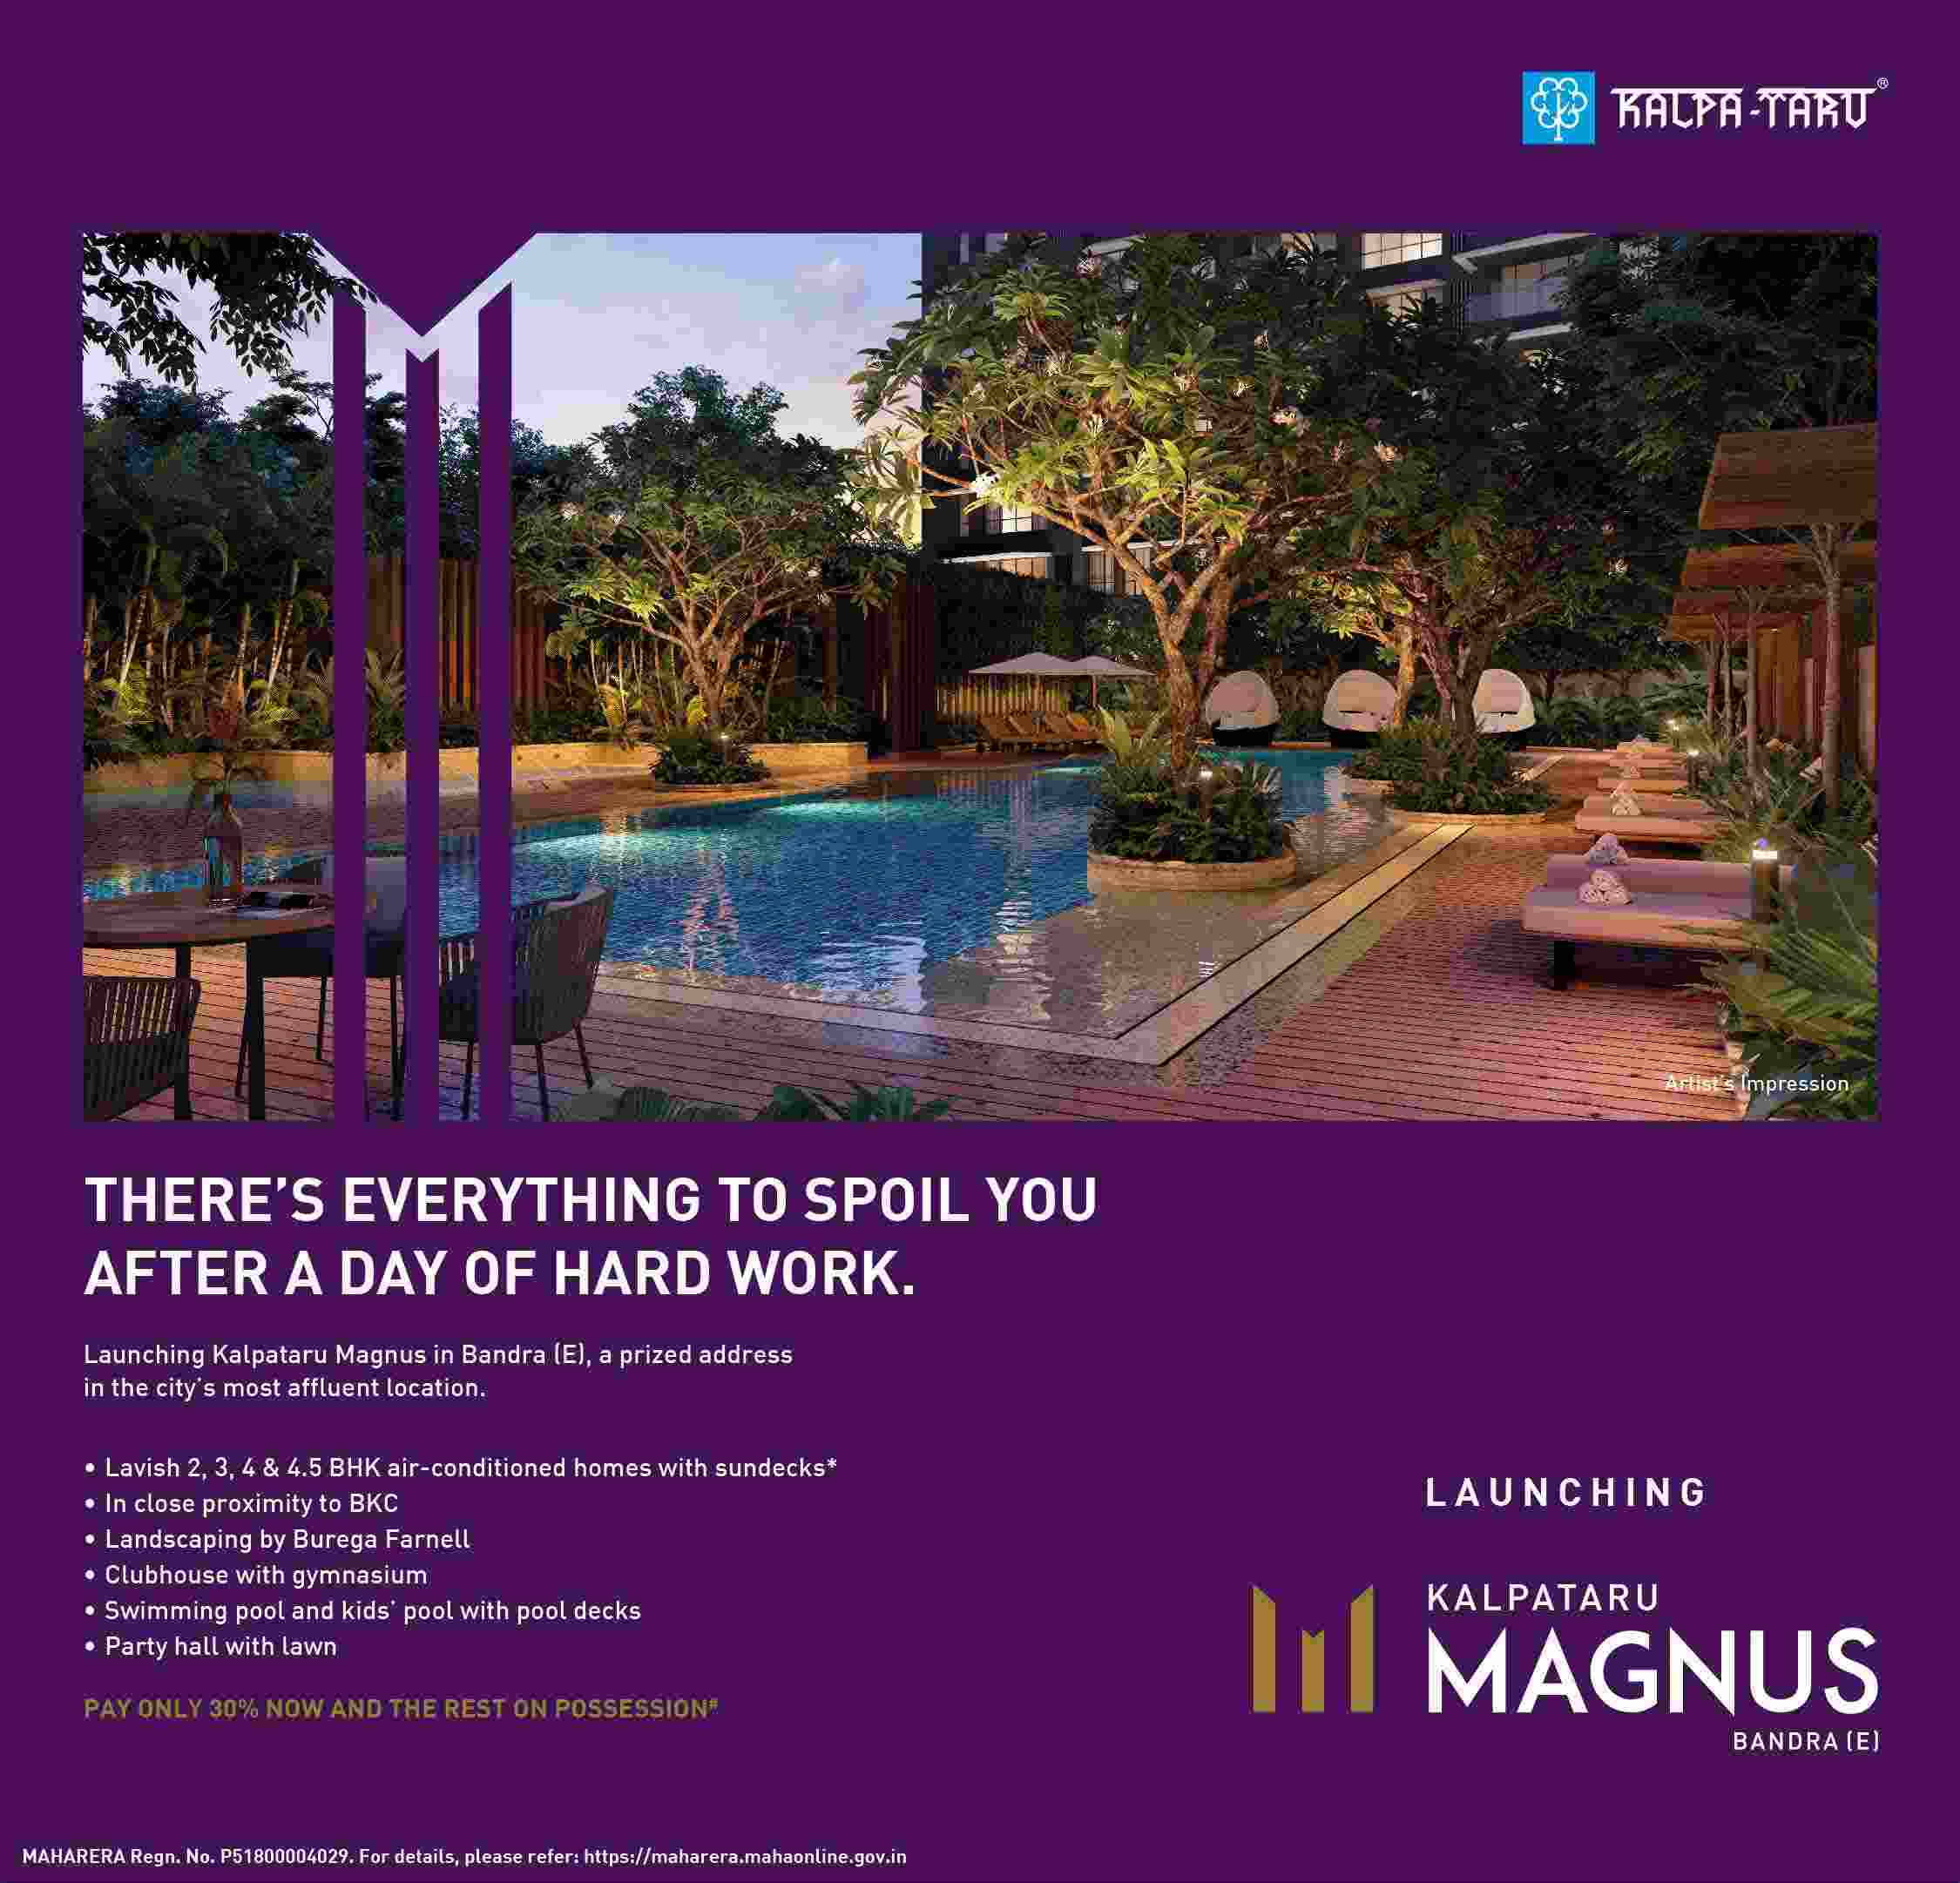 Pay only 30% now & rest on possession at Kalpataru Magnus in Mumbai Update